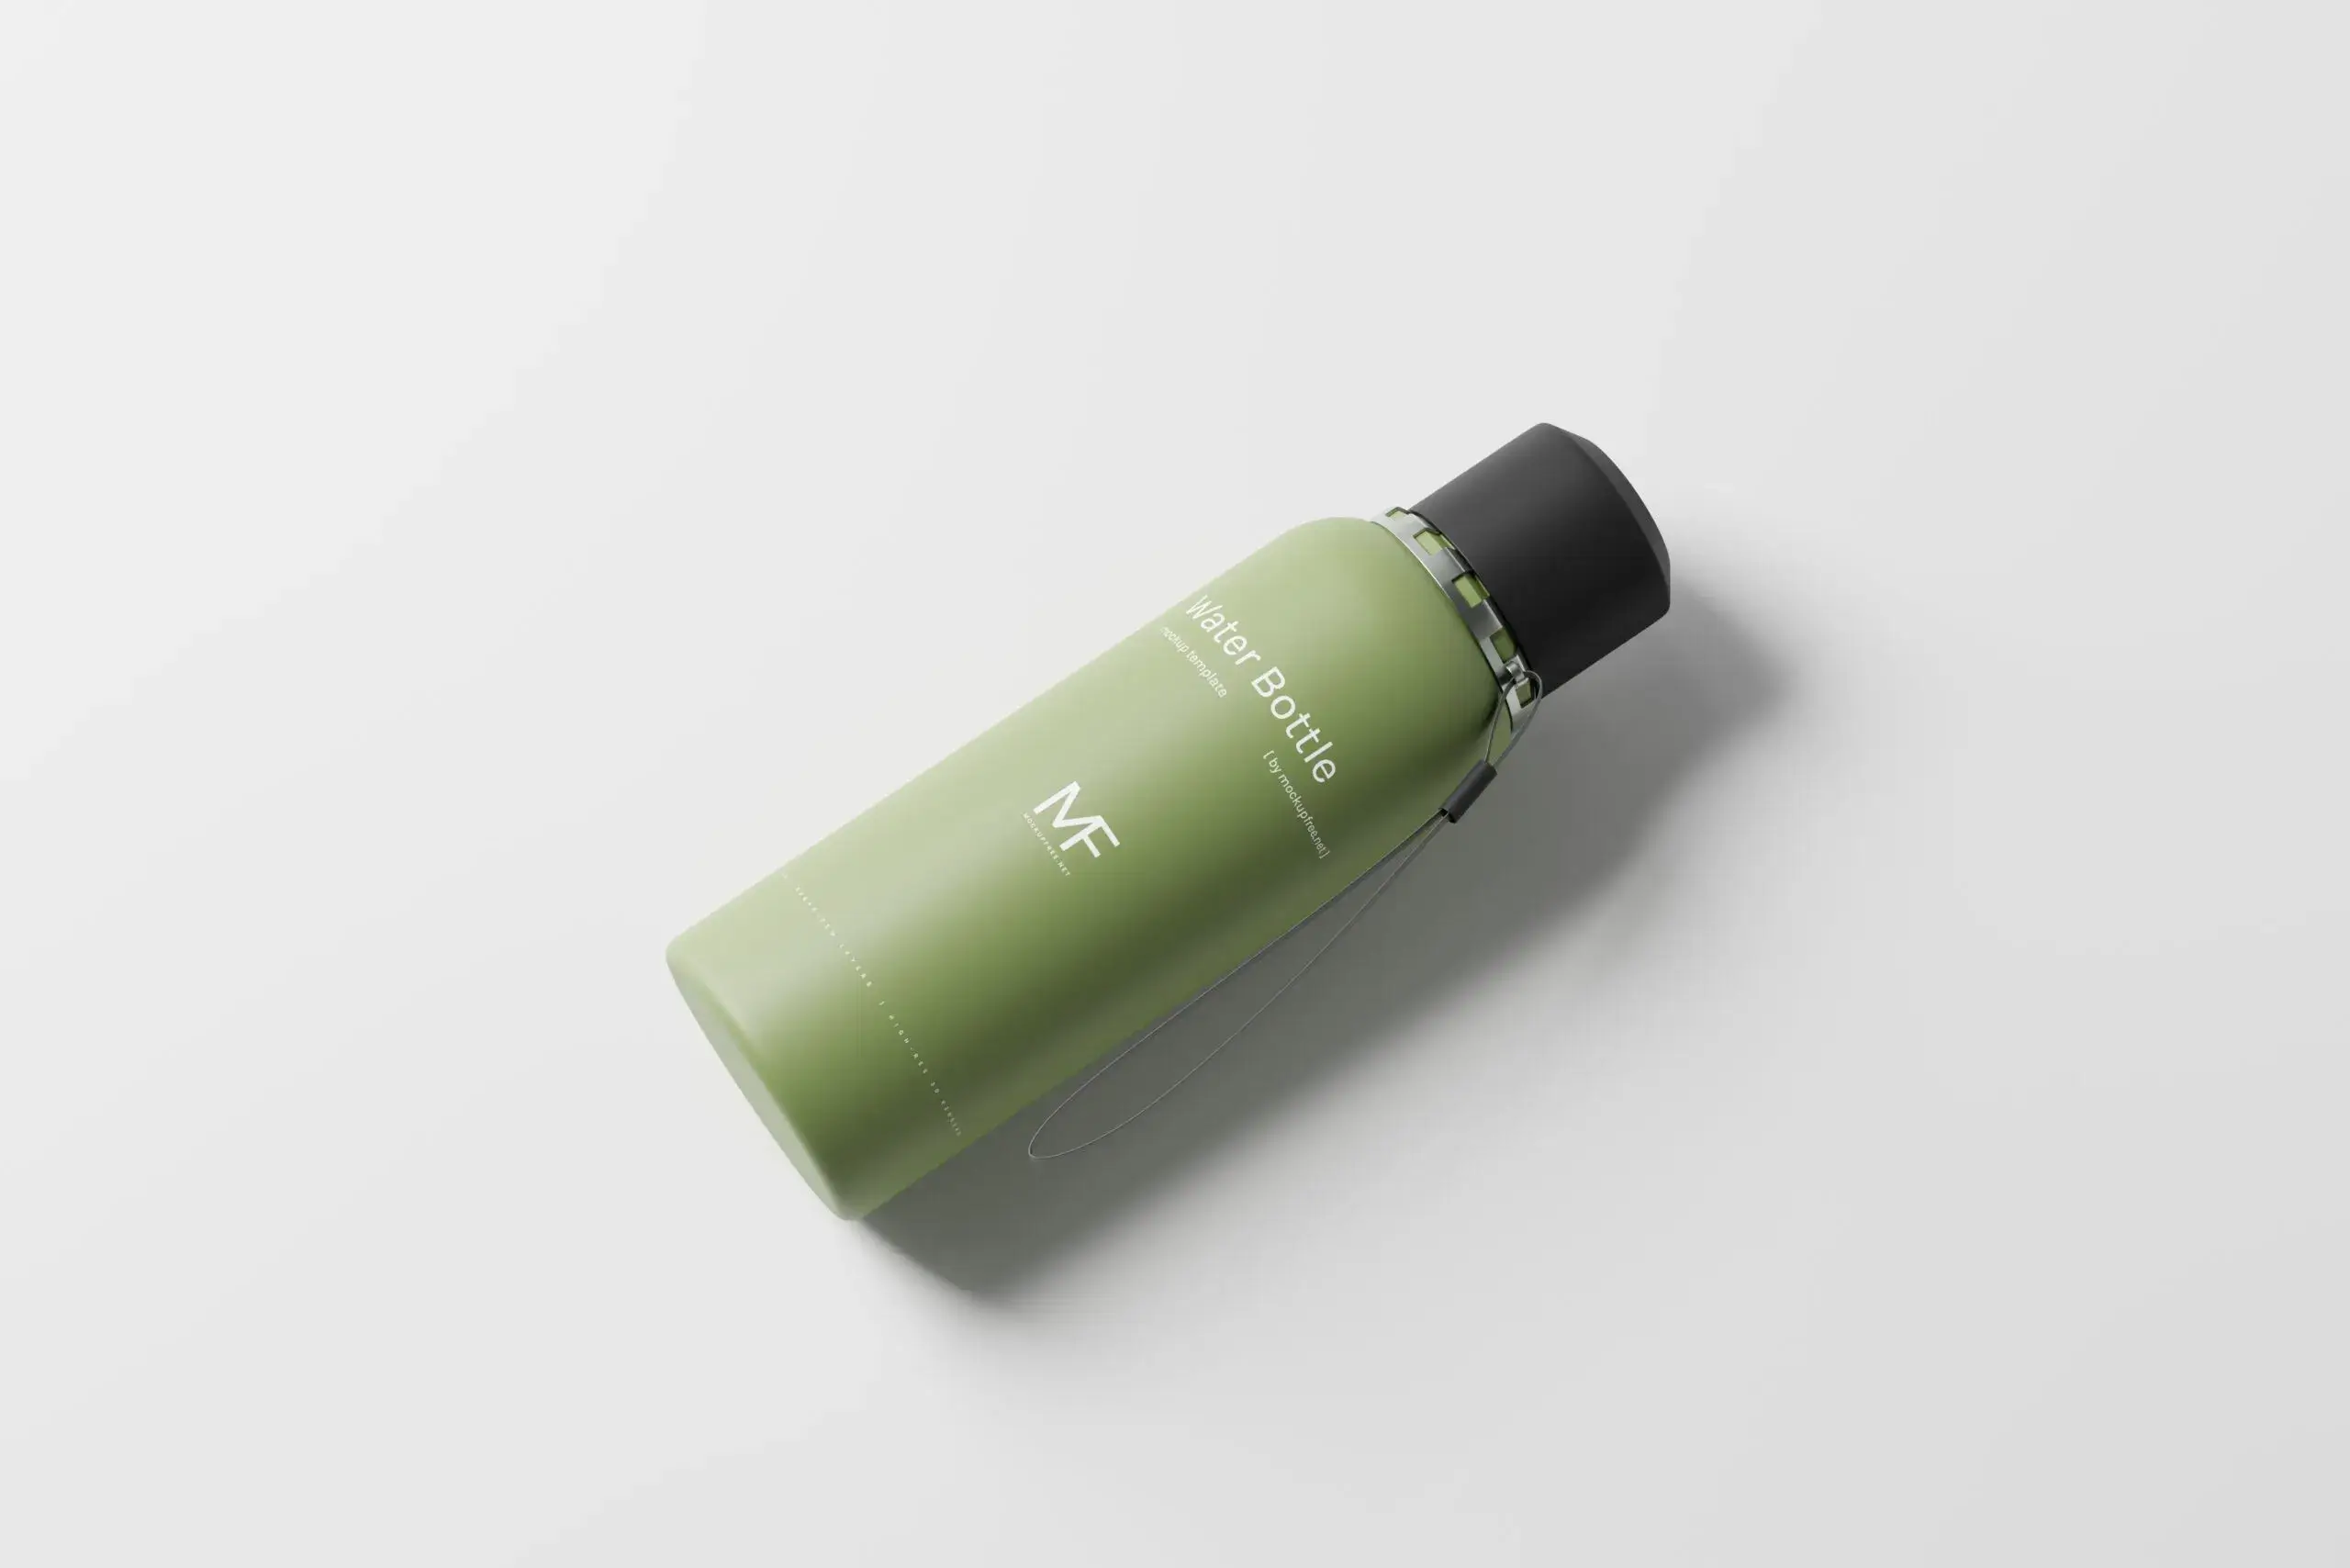 8 Free Travelling Plastic Water Bottle Mockup PSD Files6